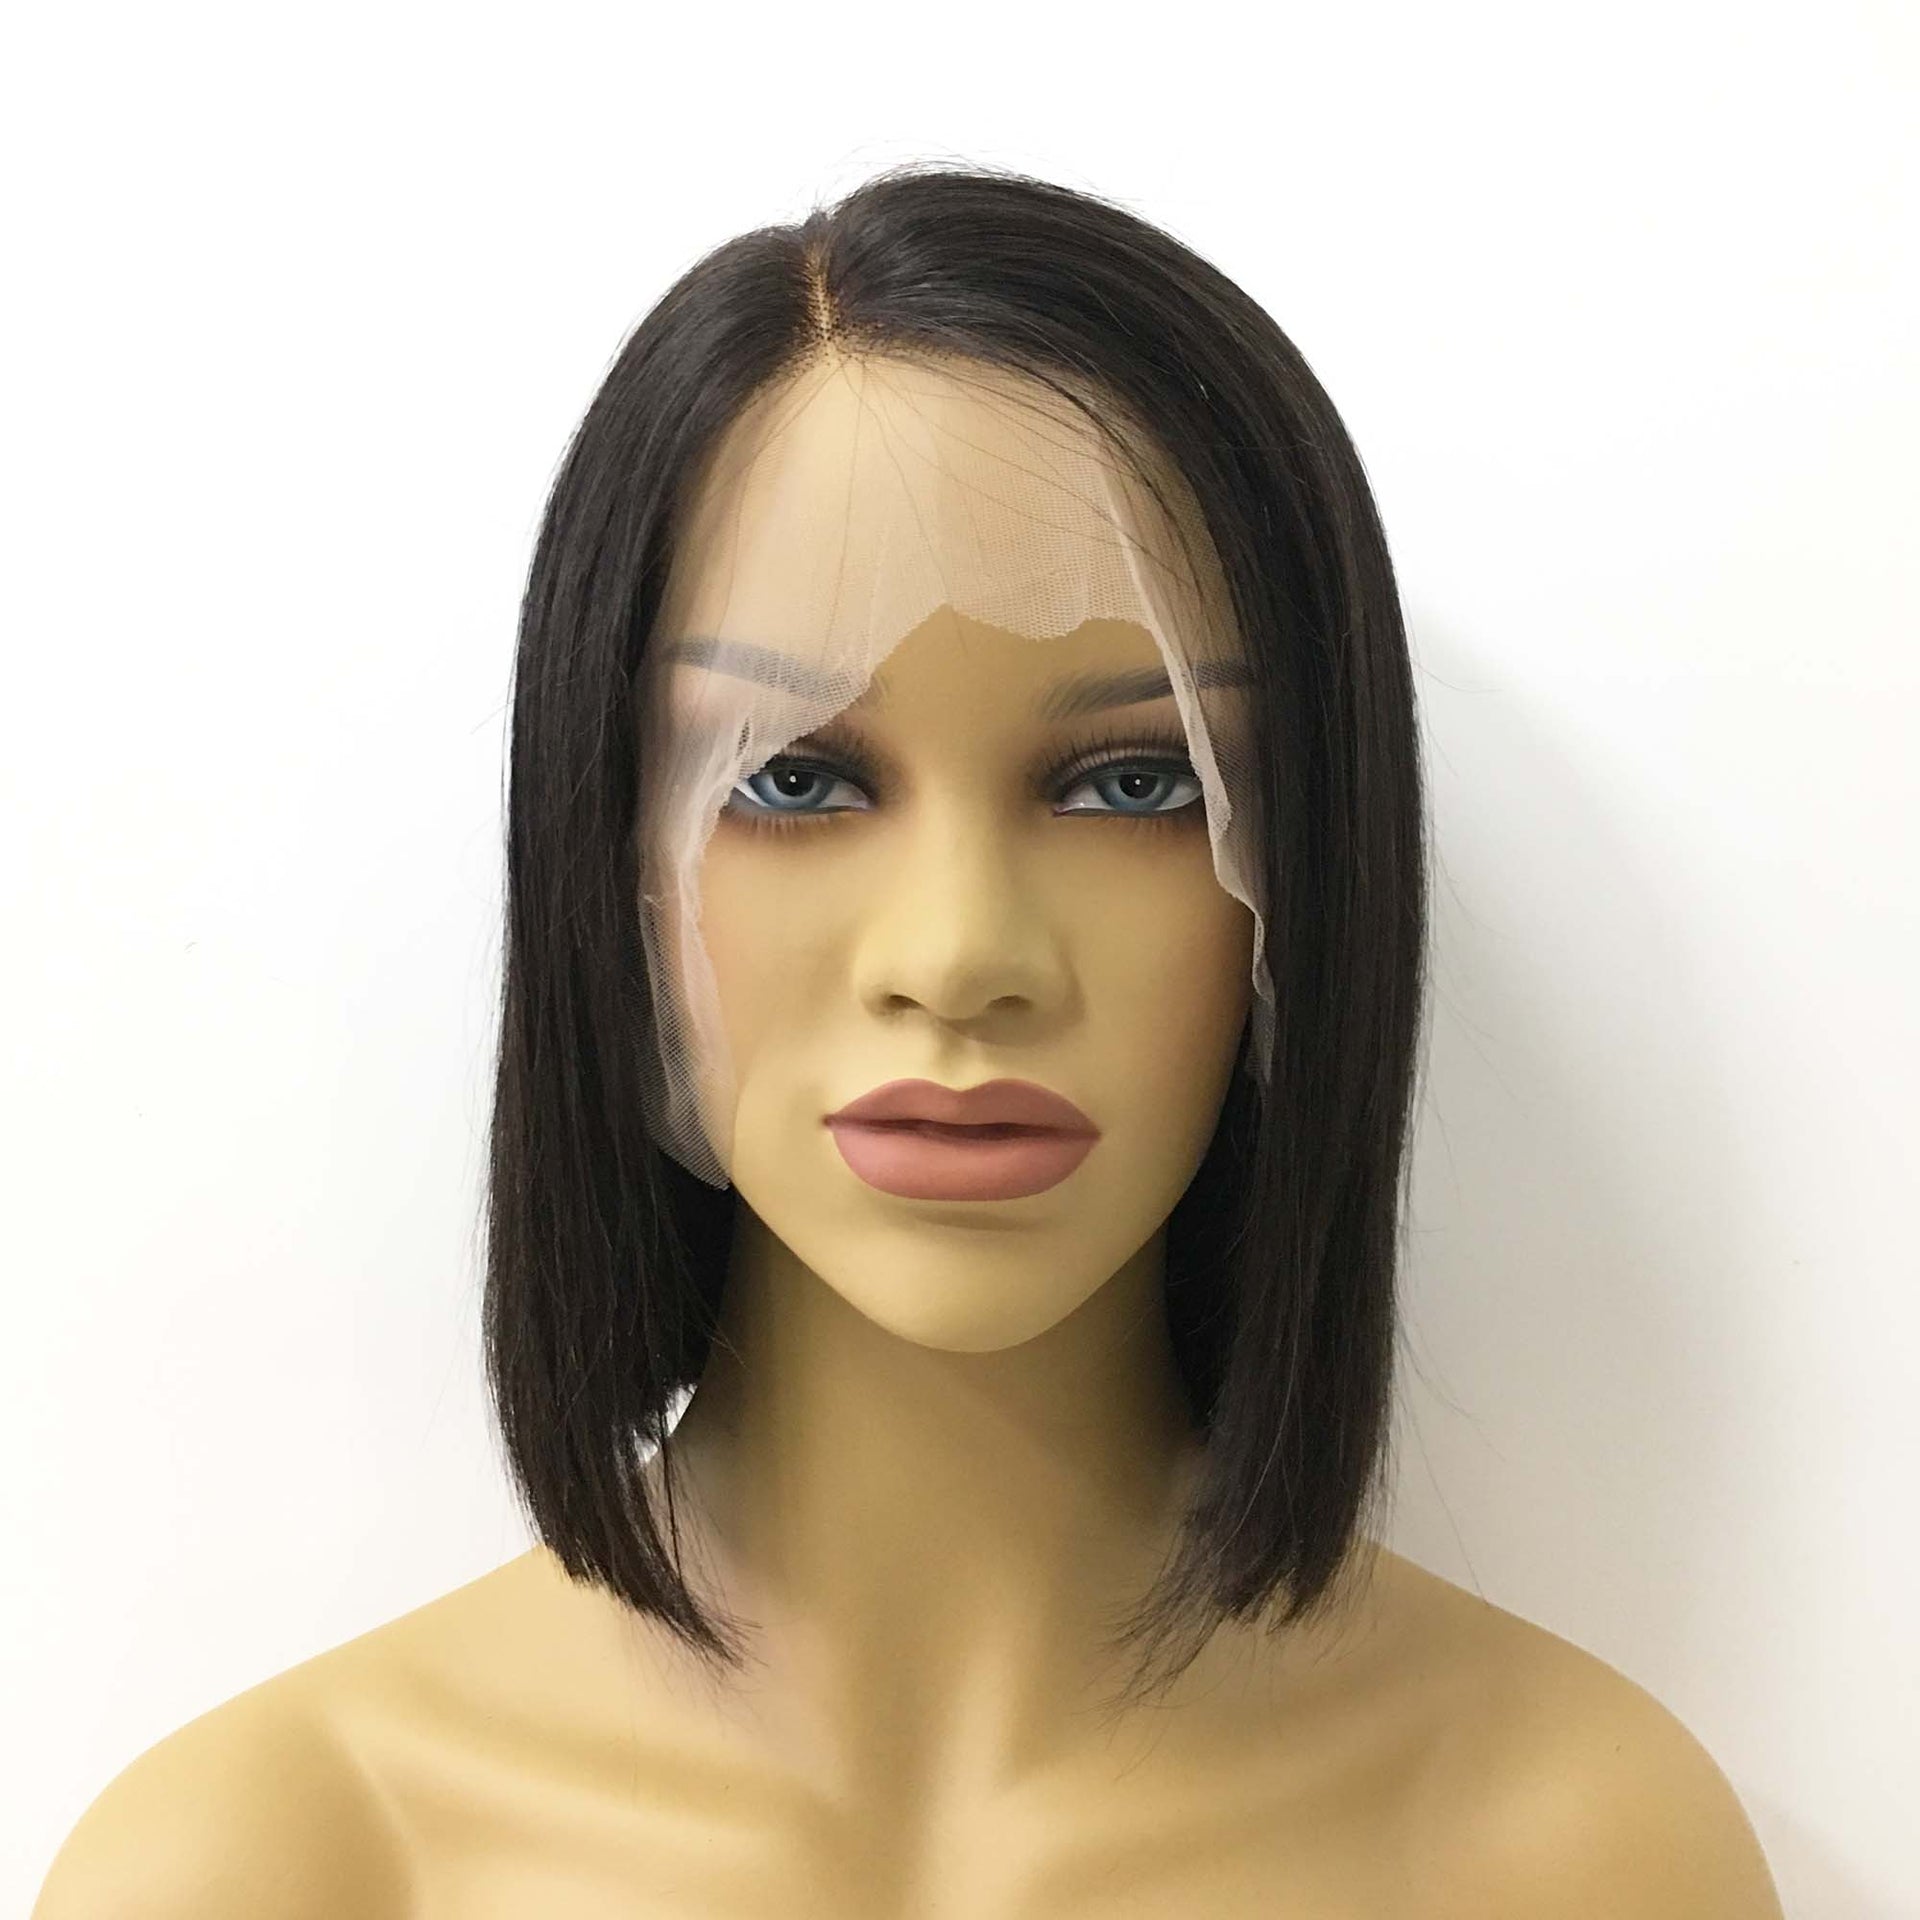 nevermindyrhead Women Natural Black Human Hair 13X6 Lace Front Medium Length Straight Side Part Wig